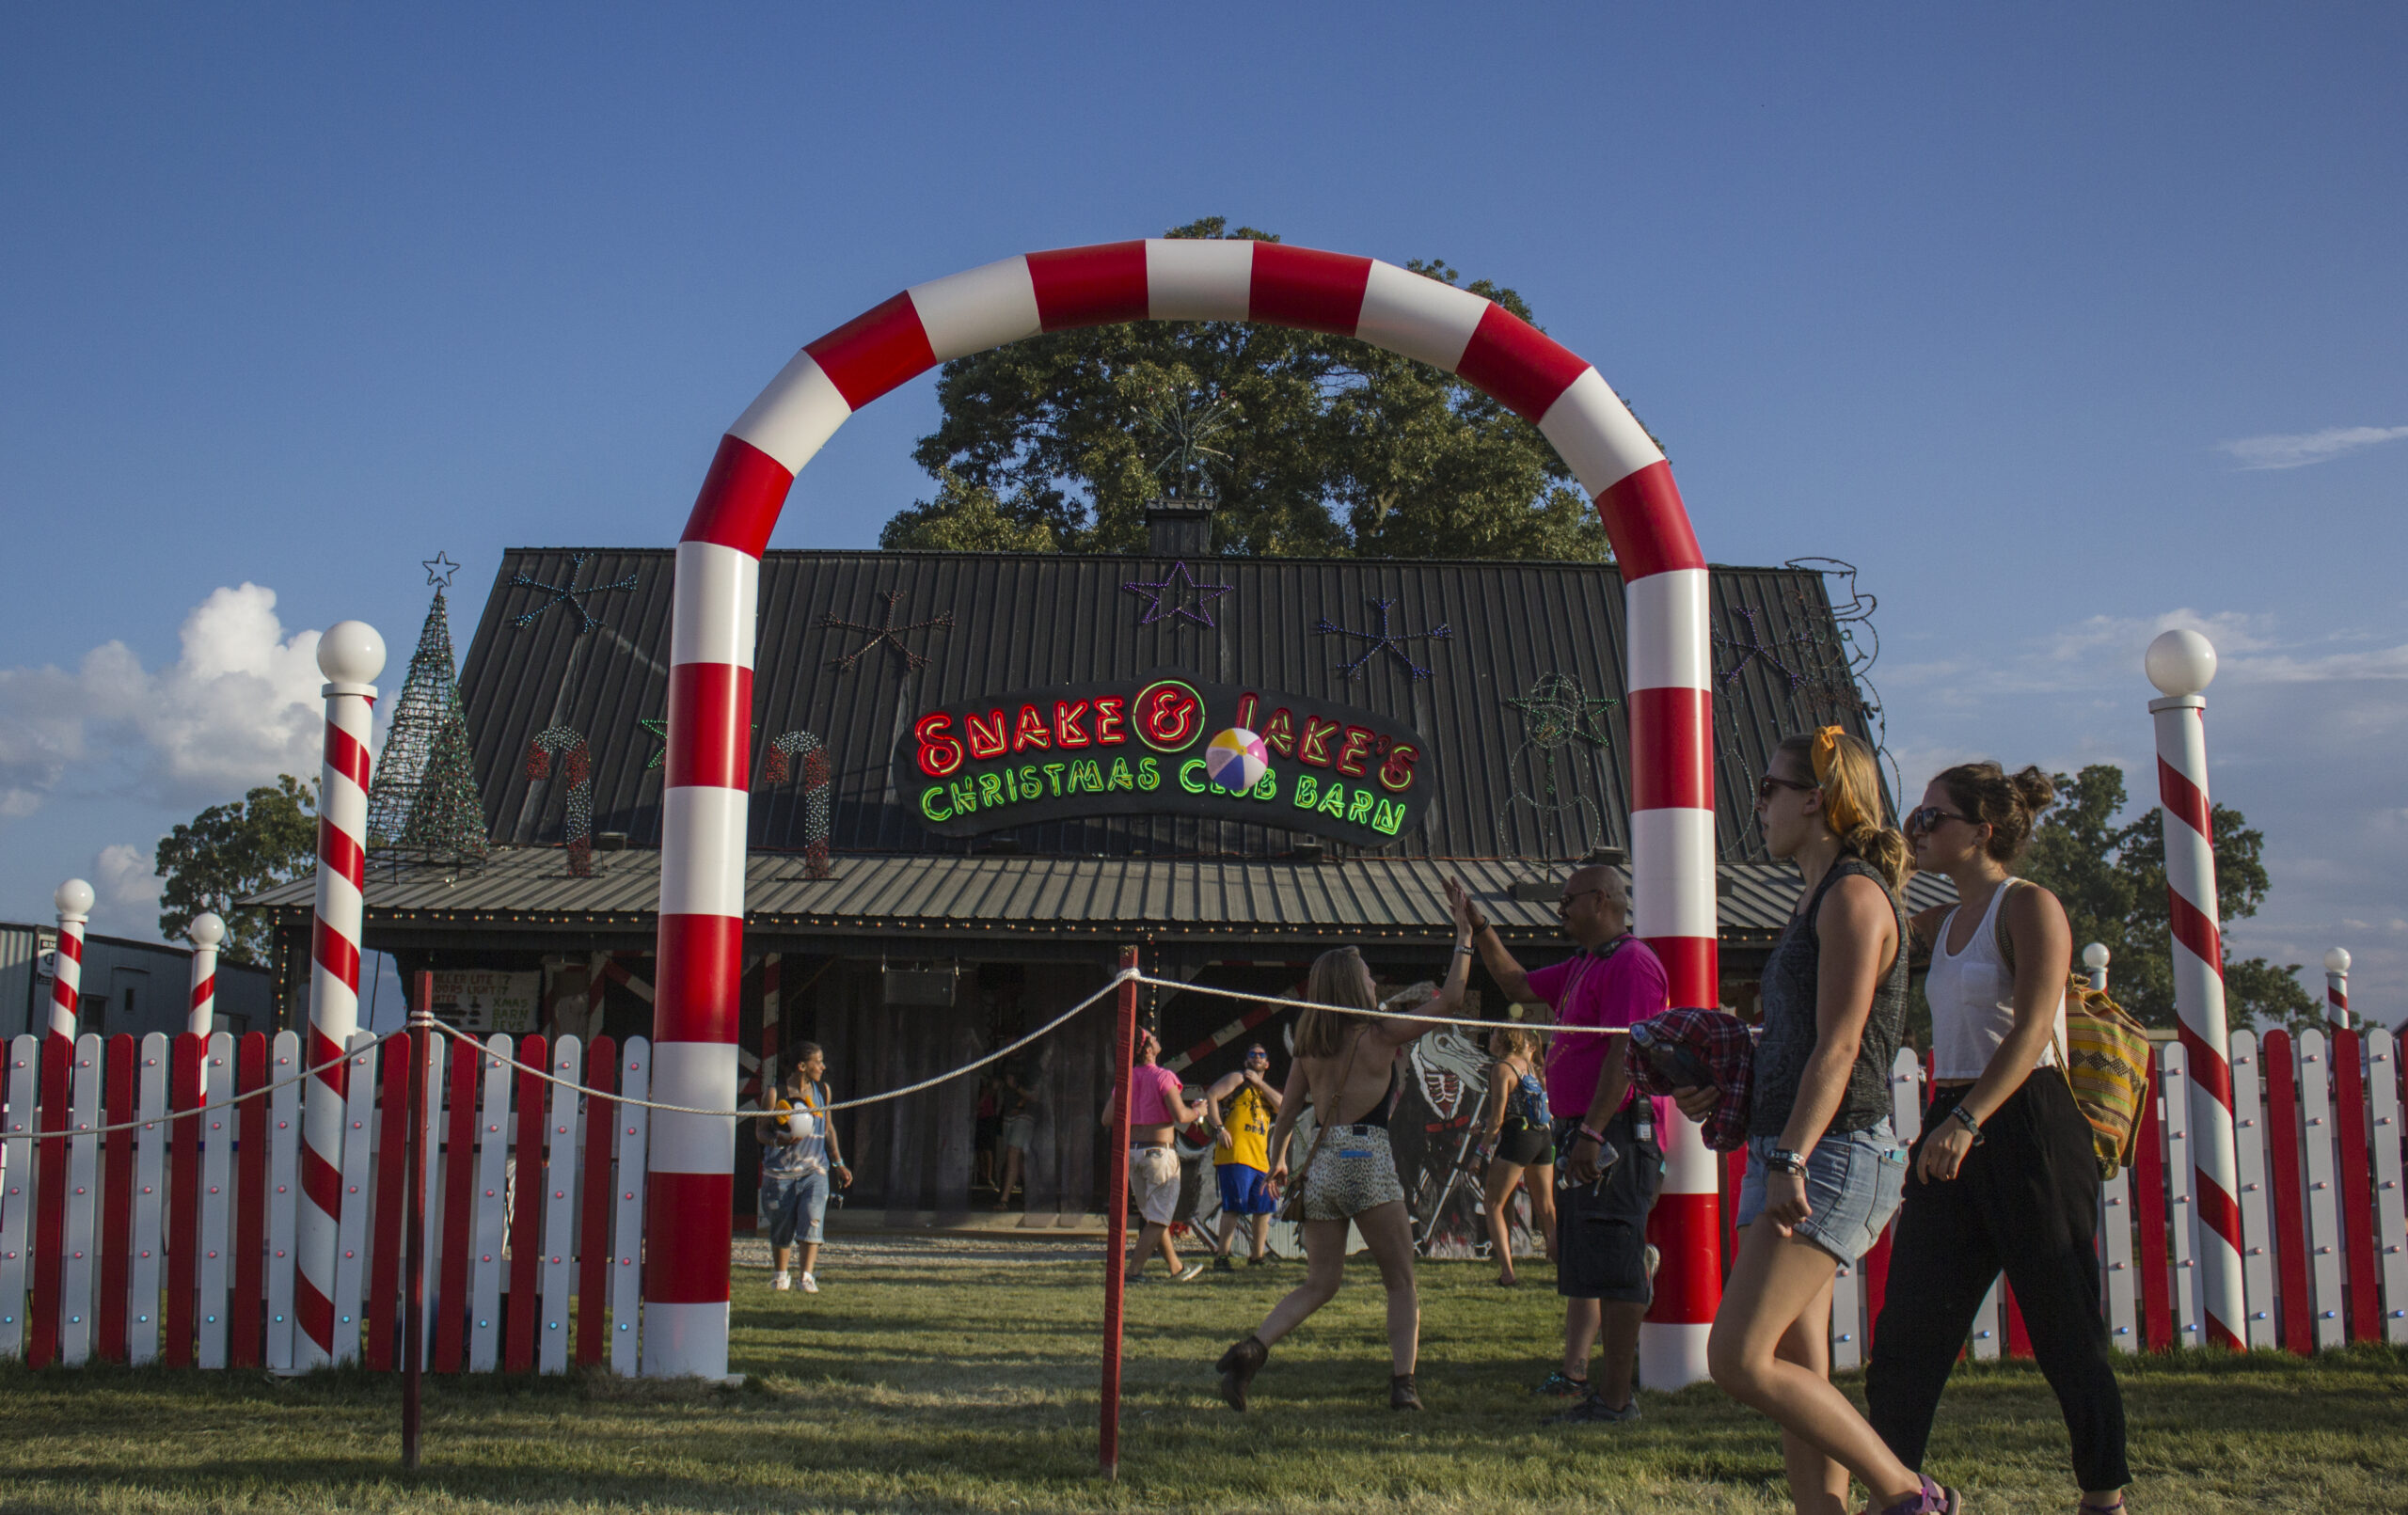 Snake & Jakes Christmas Club Barn at the Bonnaroo Music & Arts Festival in Manchester, Tennessee on 06/12/15. Photo by: Matthew McGuire.